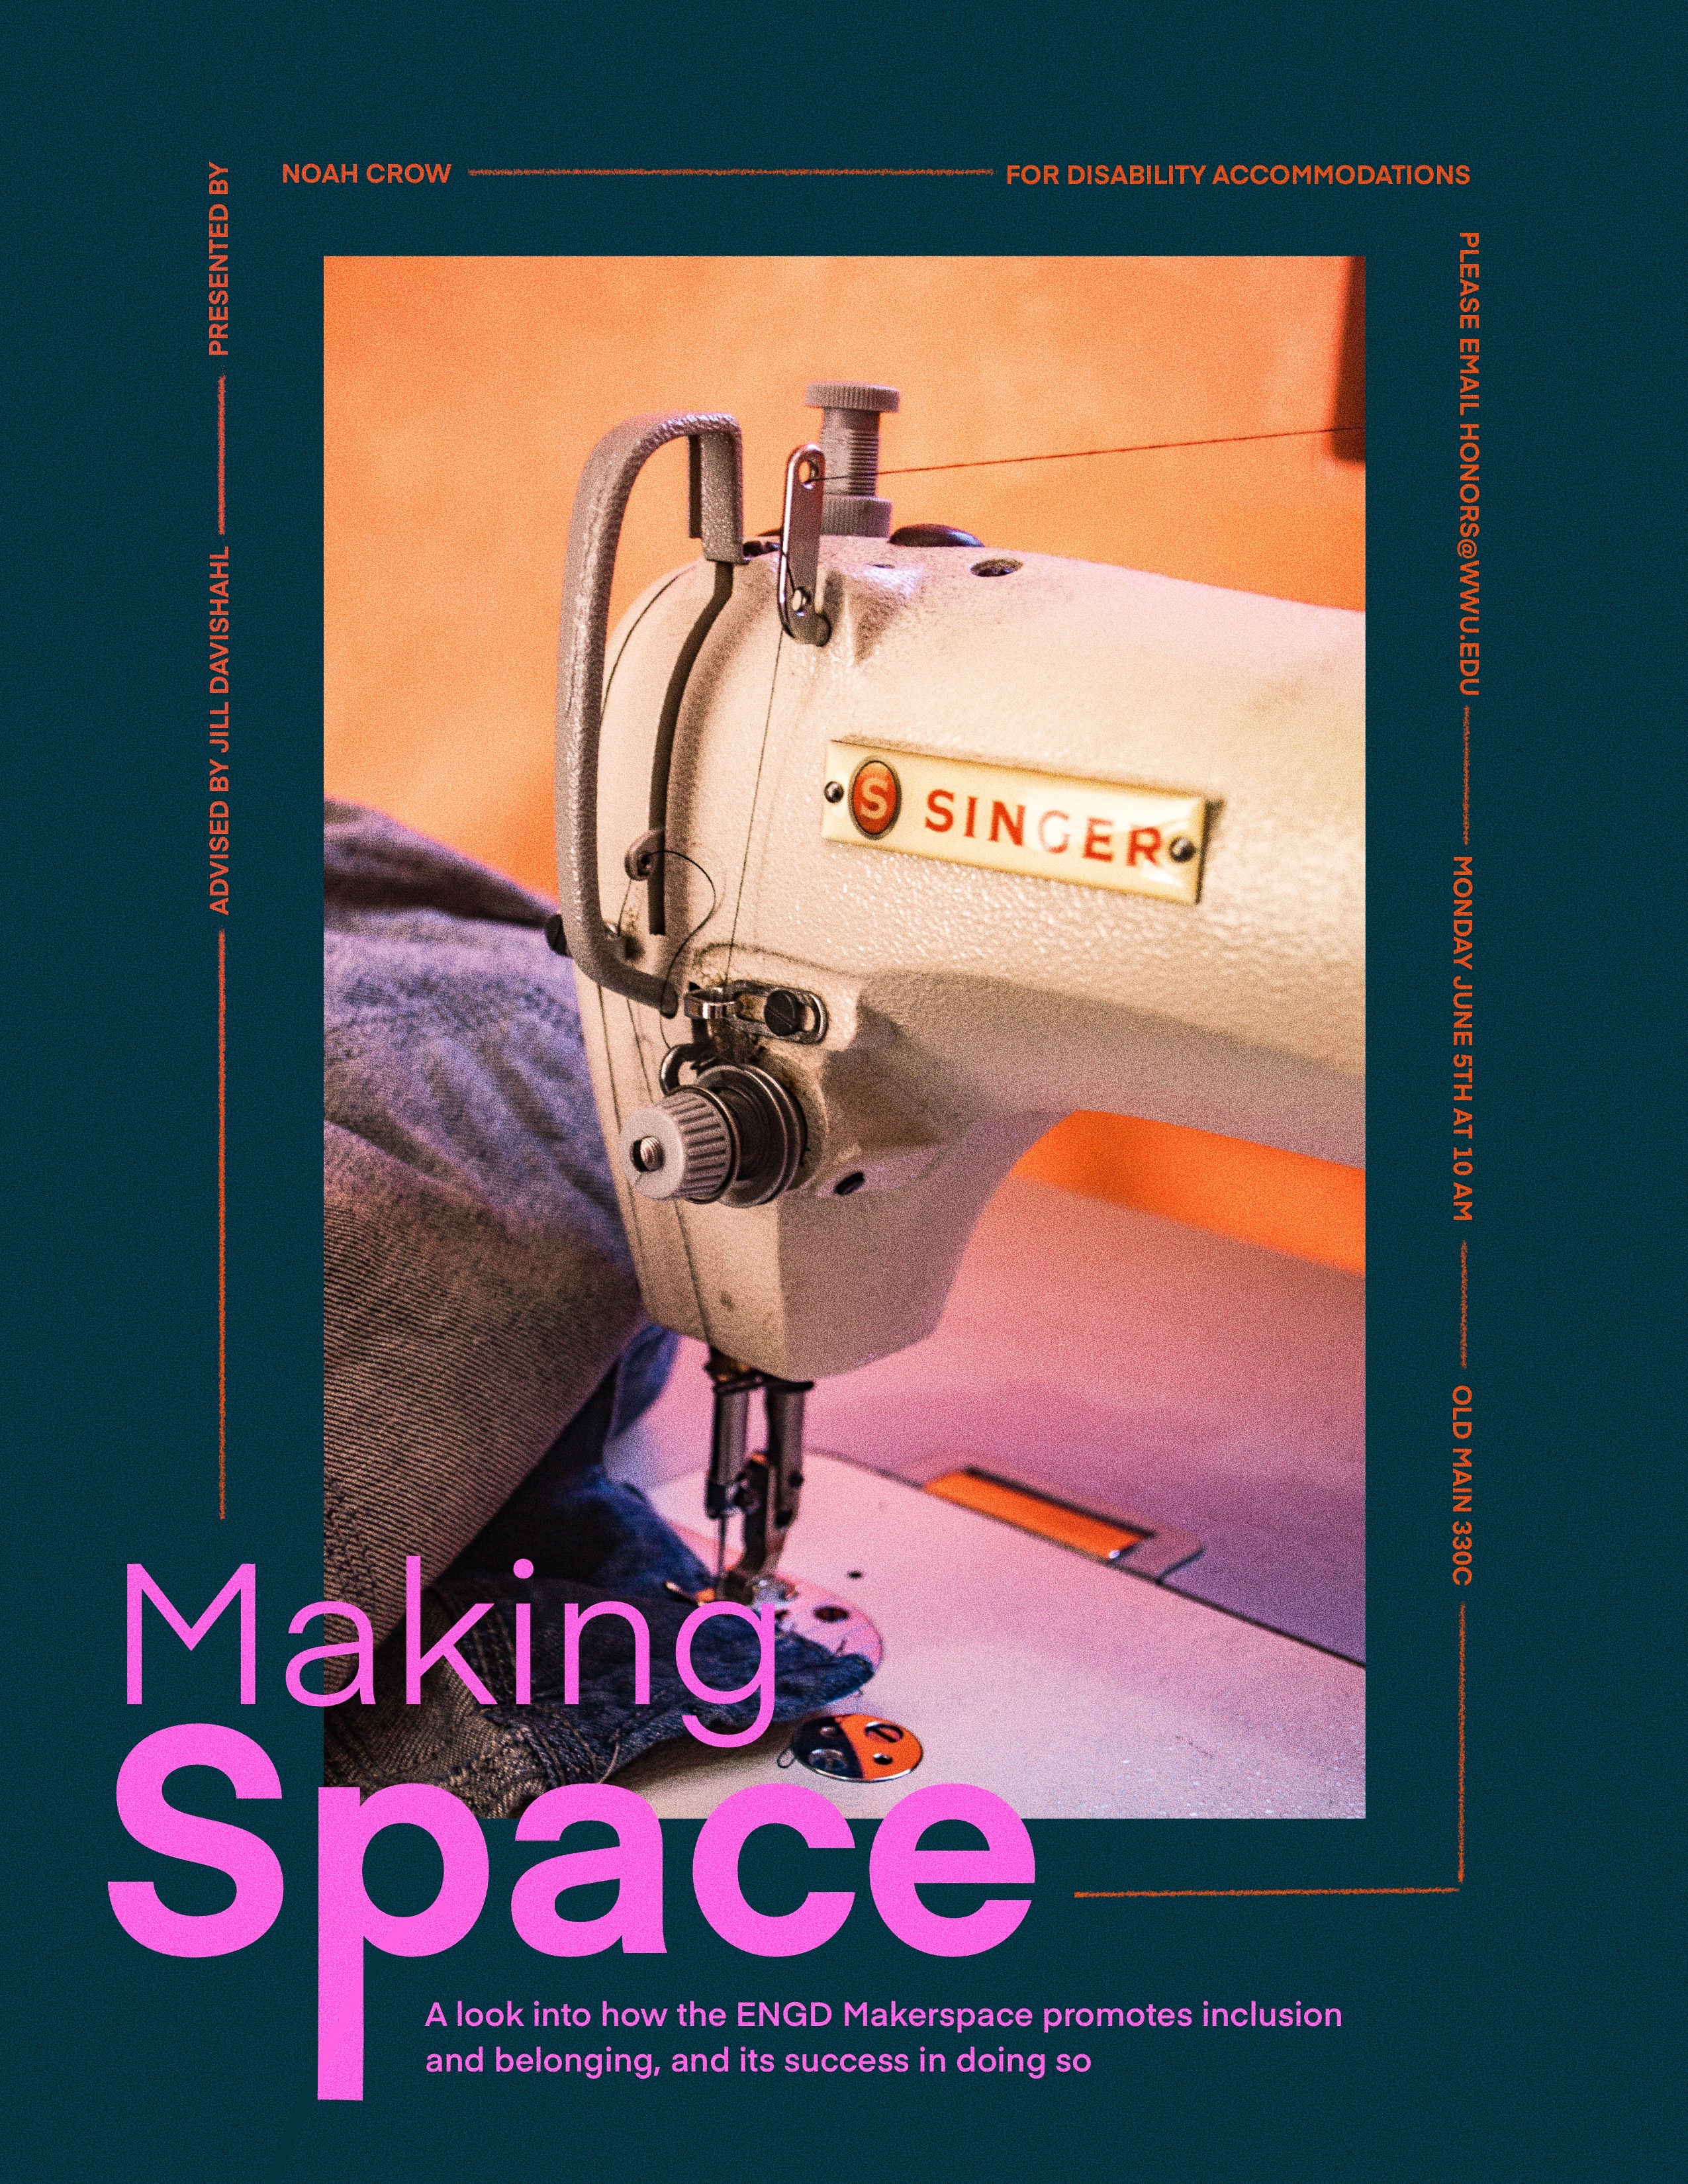 A poster with an image of a sewing machine centered on a dark blue page, with text in pink and orange above and below. The text reads: "Making Space, A look into how the ENGD Makerspace promotes inclusion and belonging, and its success in doing so, presented by Noah Crow and advised by Jill Davishahl.  OM330C on June 5th, 10am. For disability accommodations, please email honors@wwu.edu."